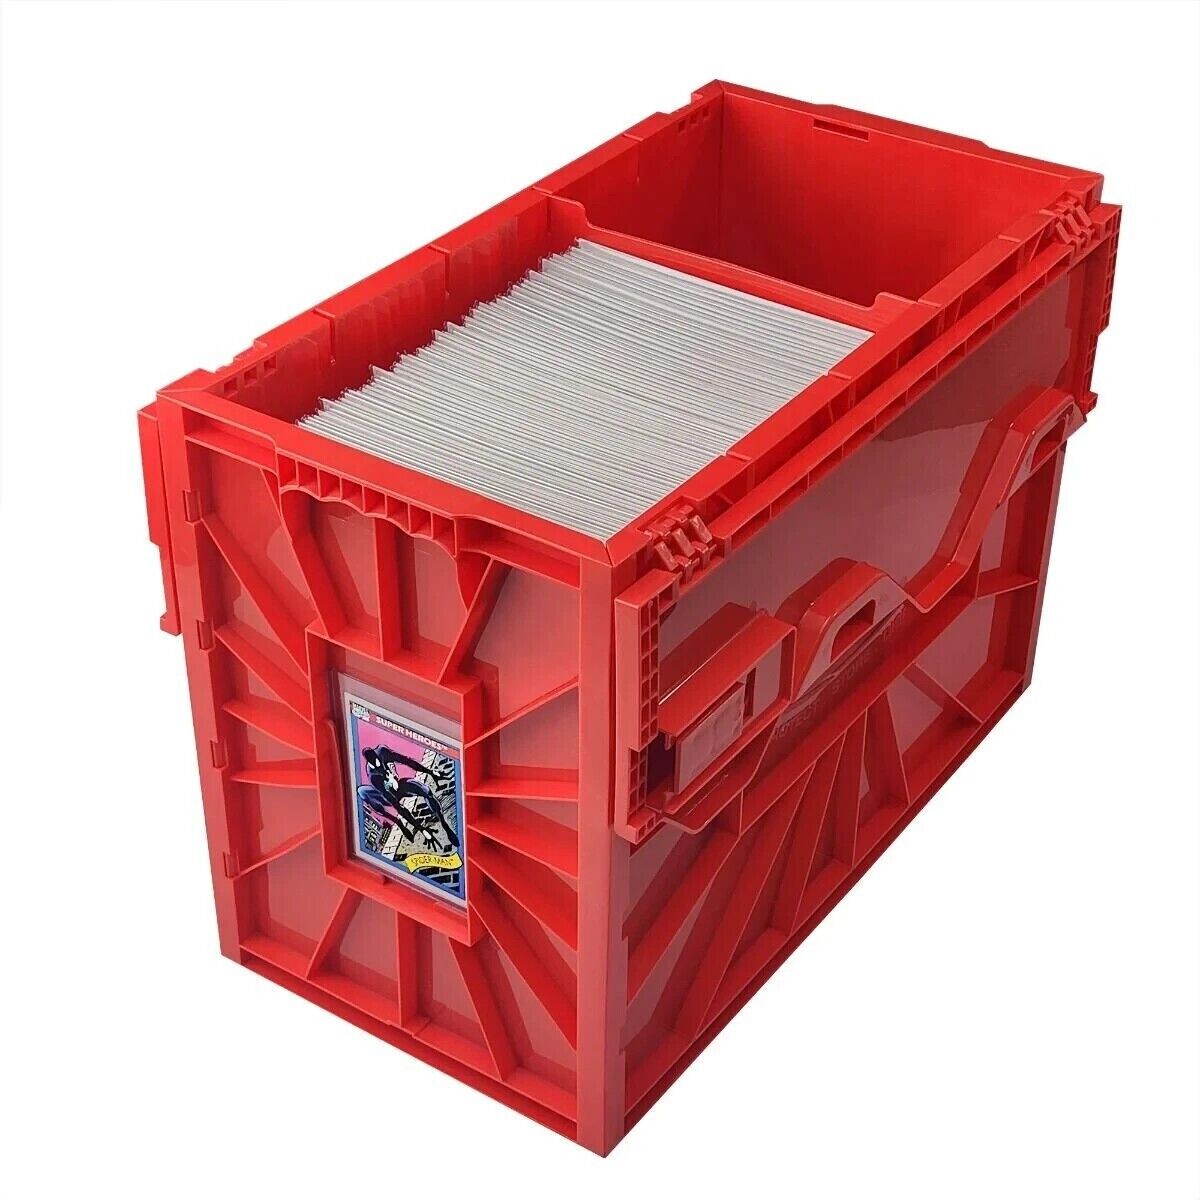 1 BCW Brand Short Plastic Comic Book Bin Box Heavy Duty with Lid - RED